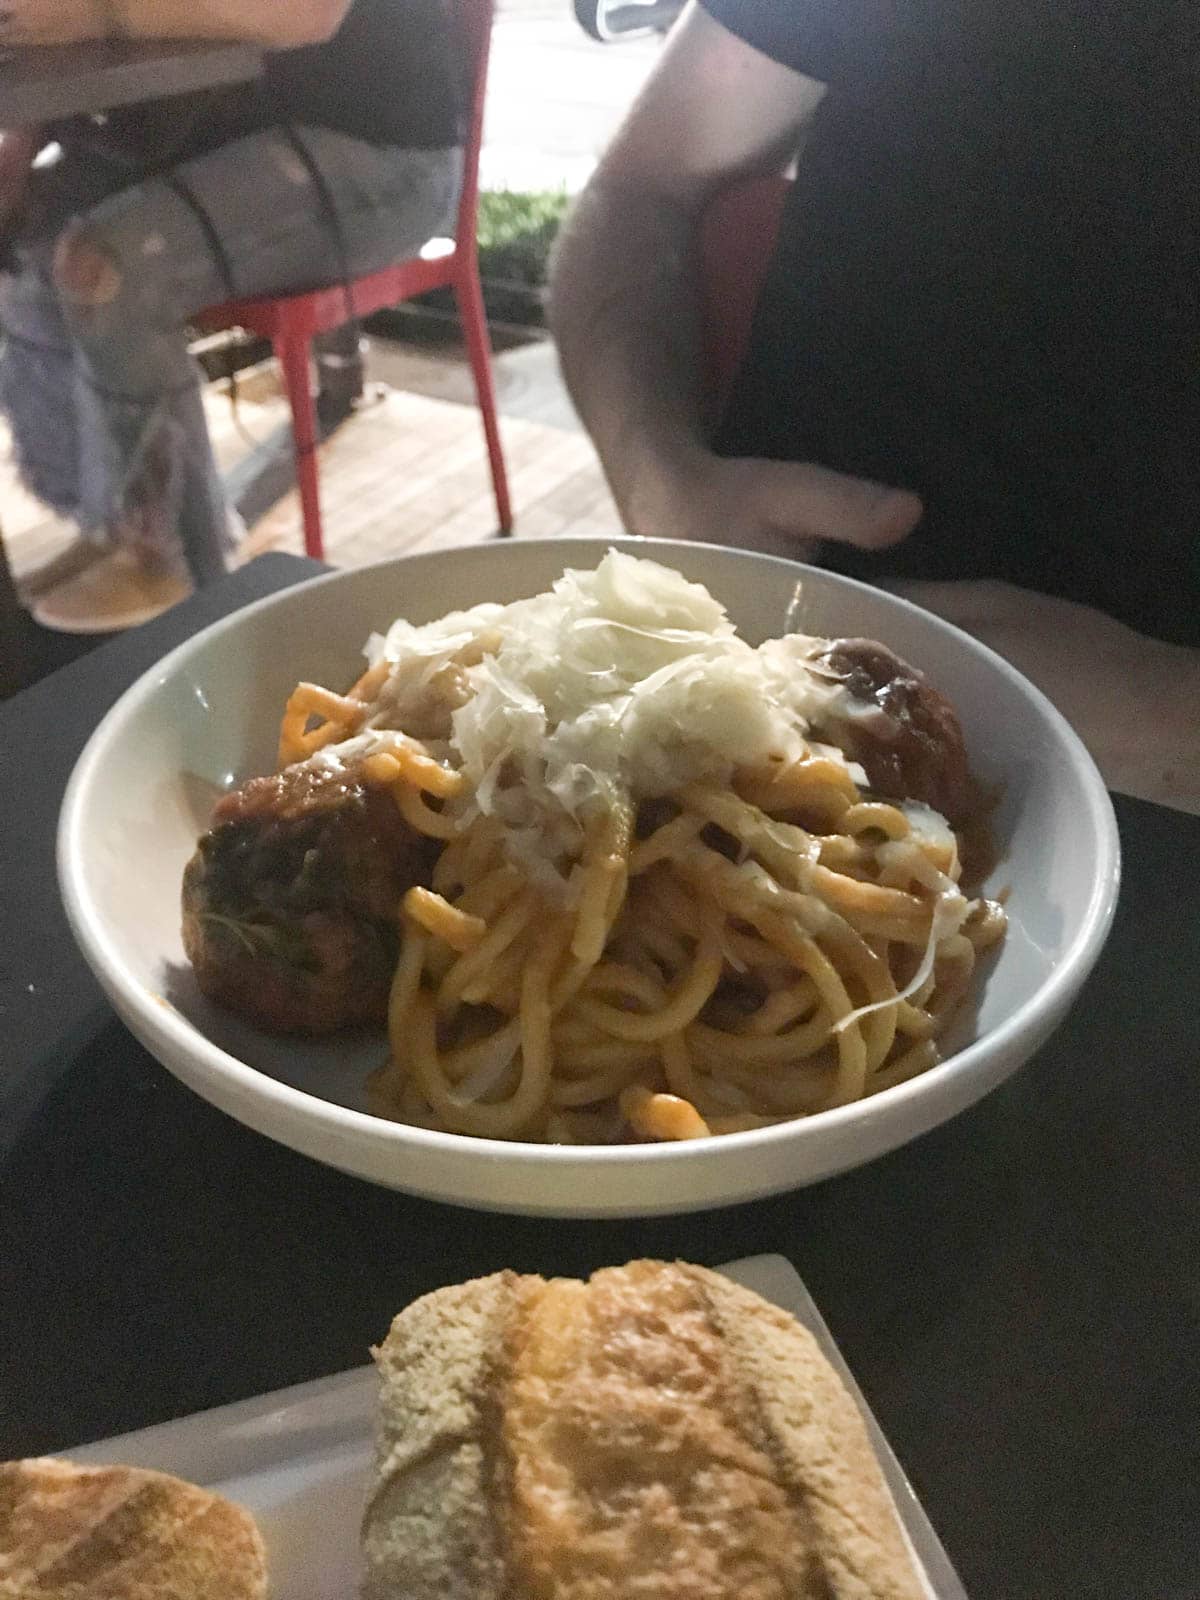 A dish of spaghetti and meatballs with a generous serving of cheese, on a restaurant table. The lack of light shows it is the evening.